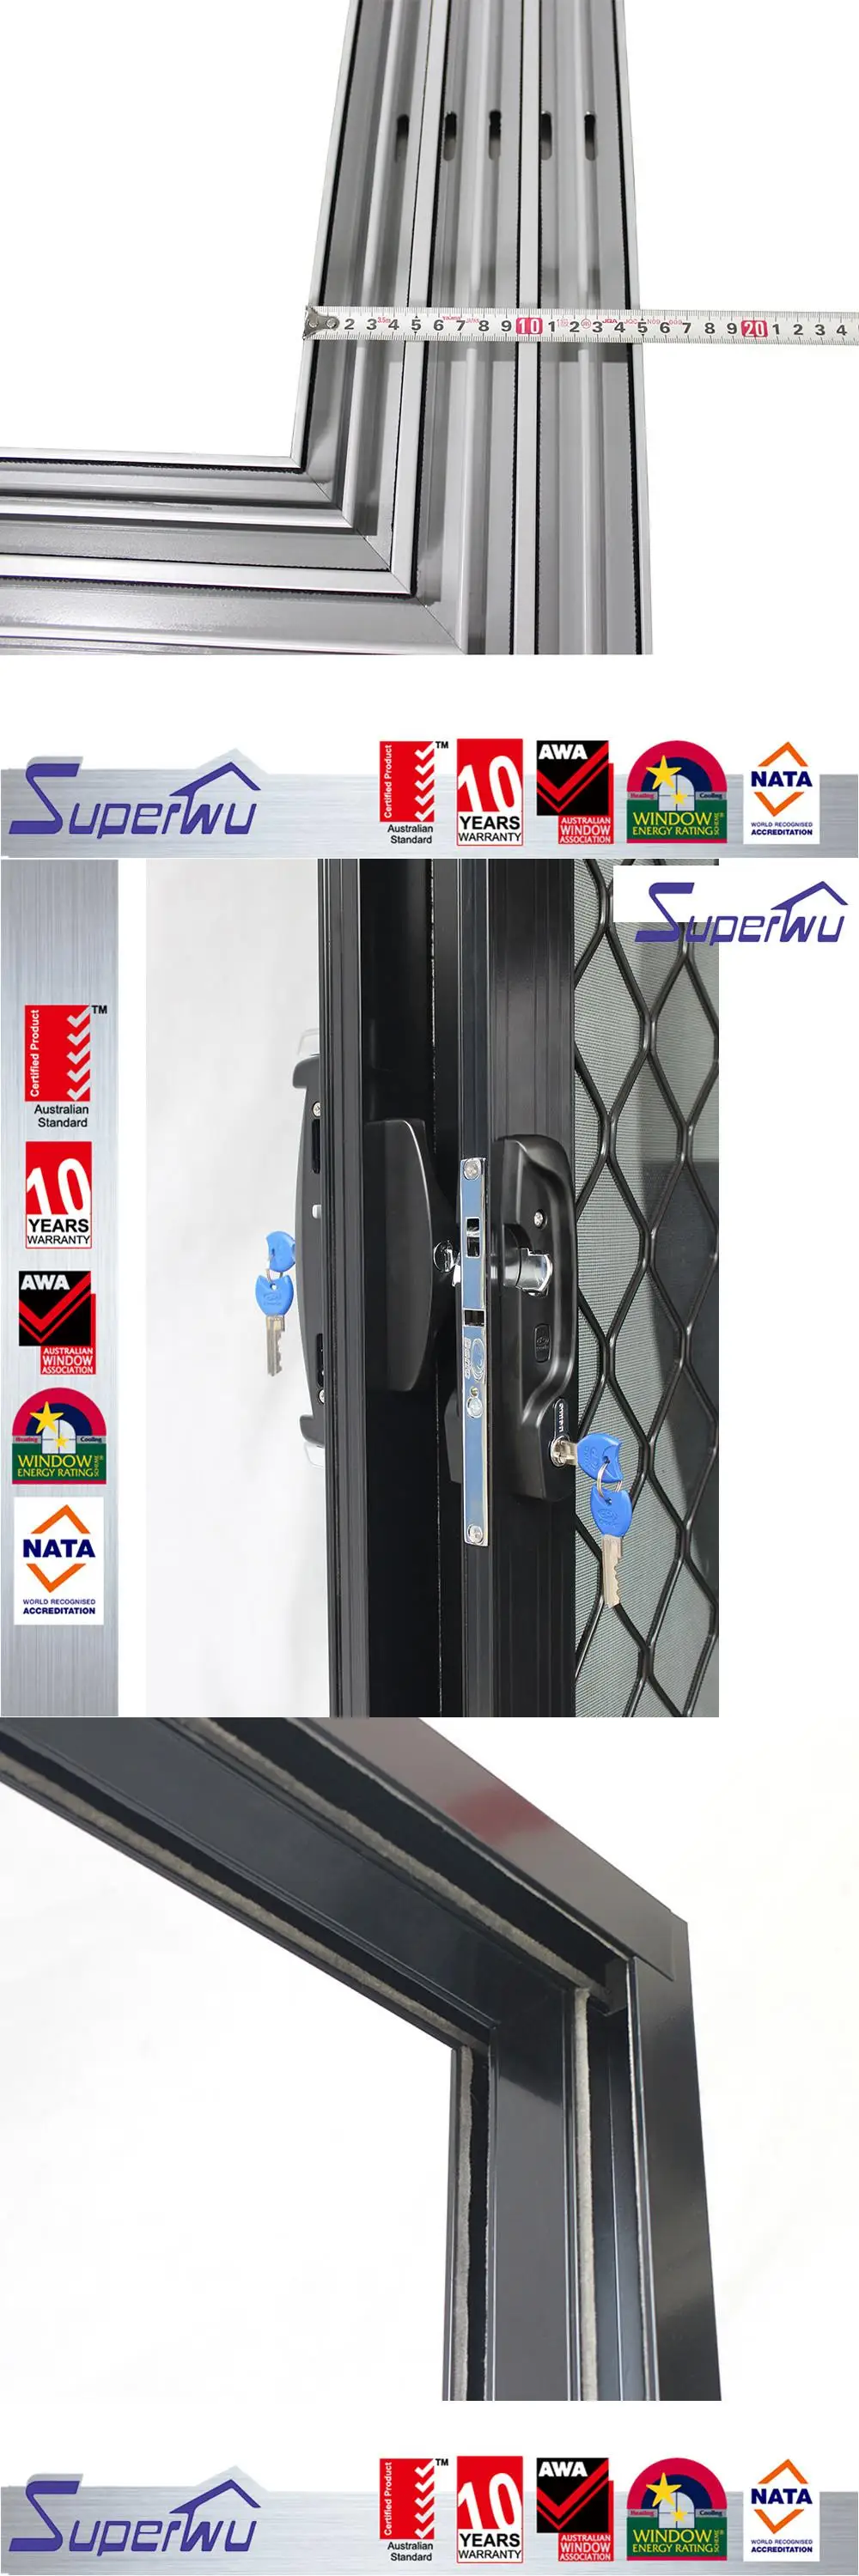 Electronic Component Transistor clear glass door commercial doors modern interior metal frame with fair price